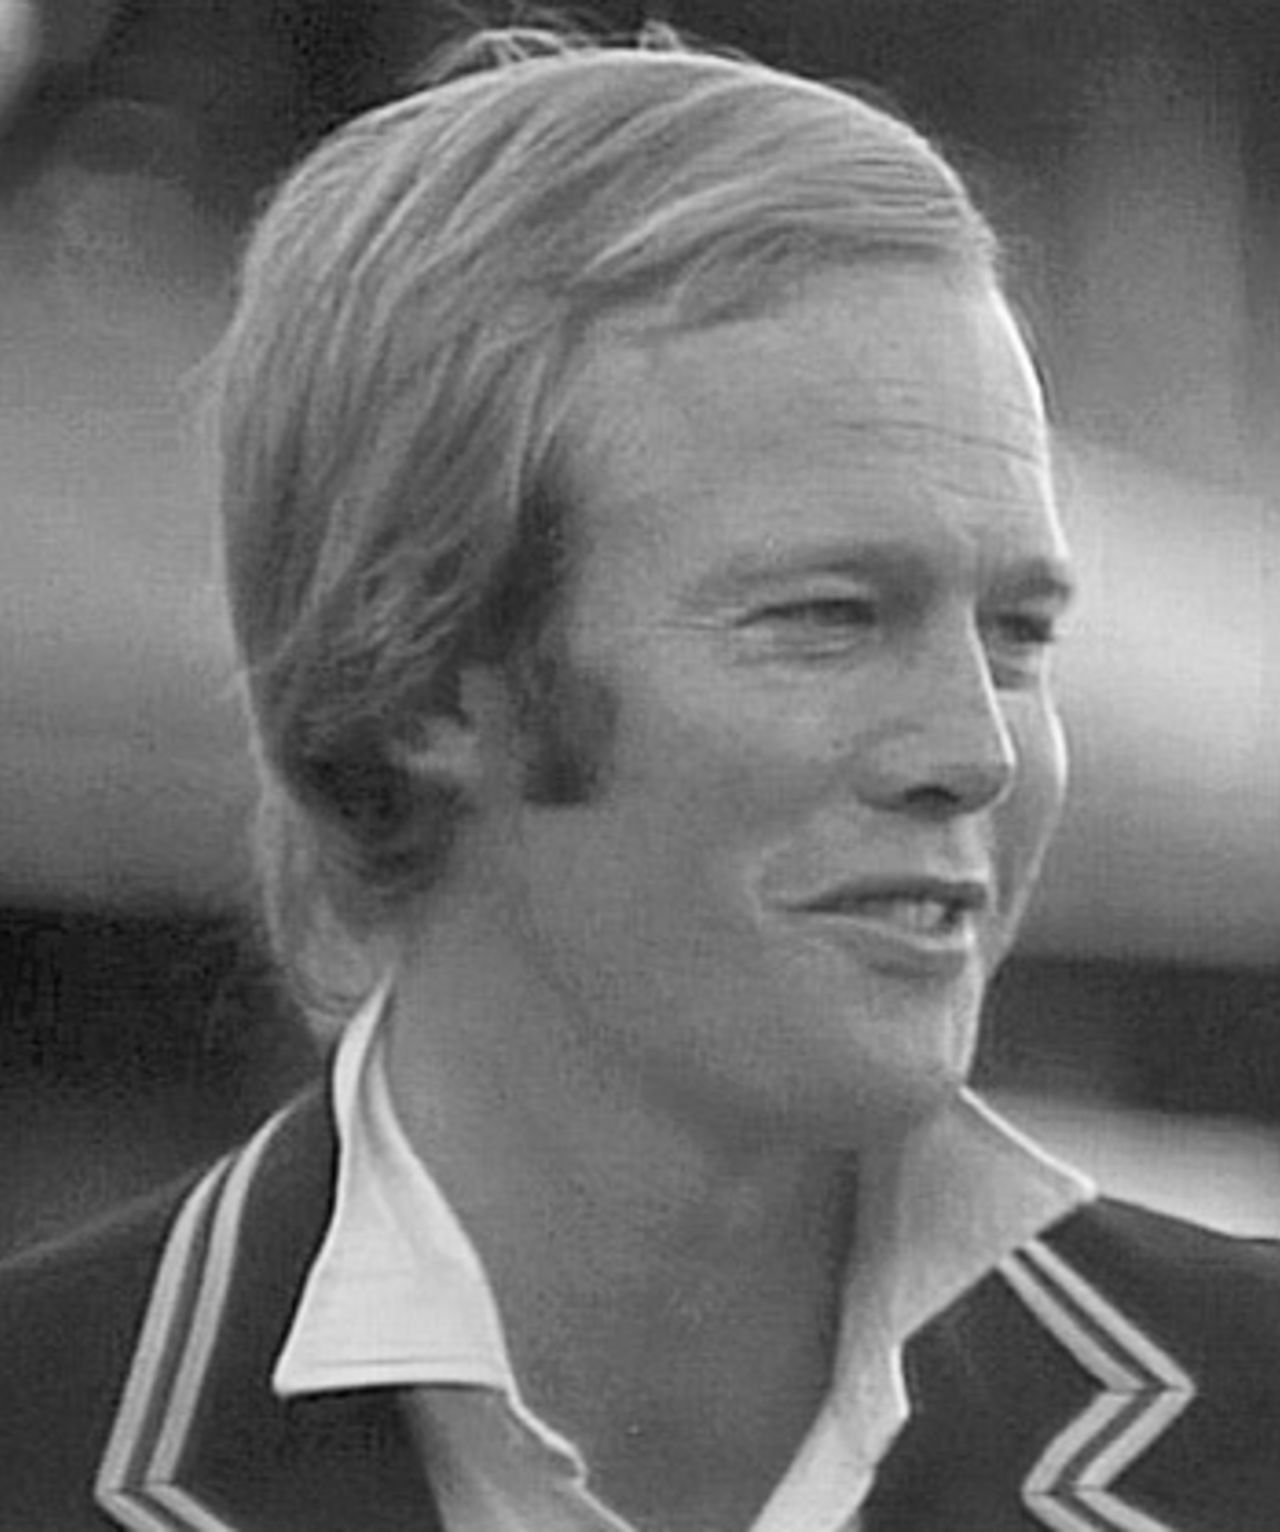 Tony Greig being interviewed in 1977